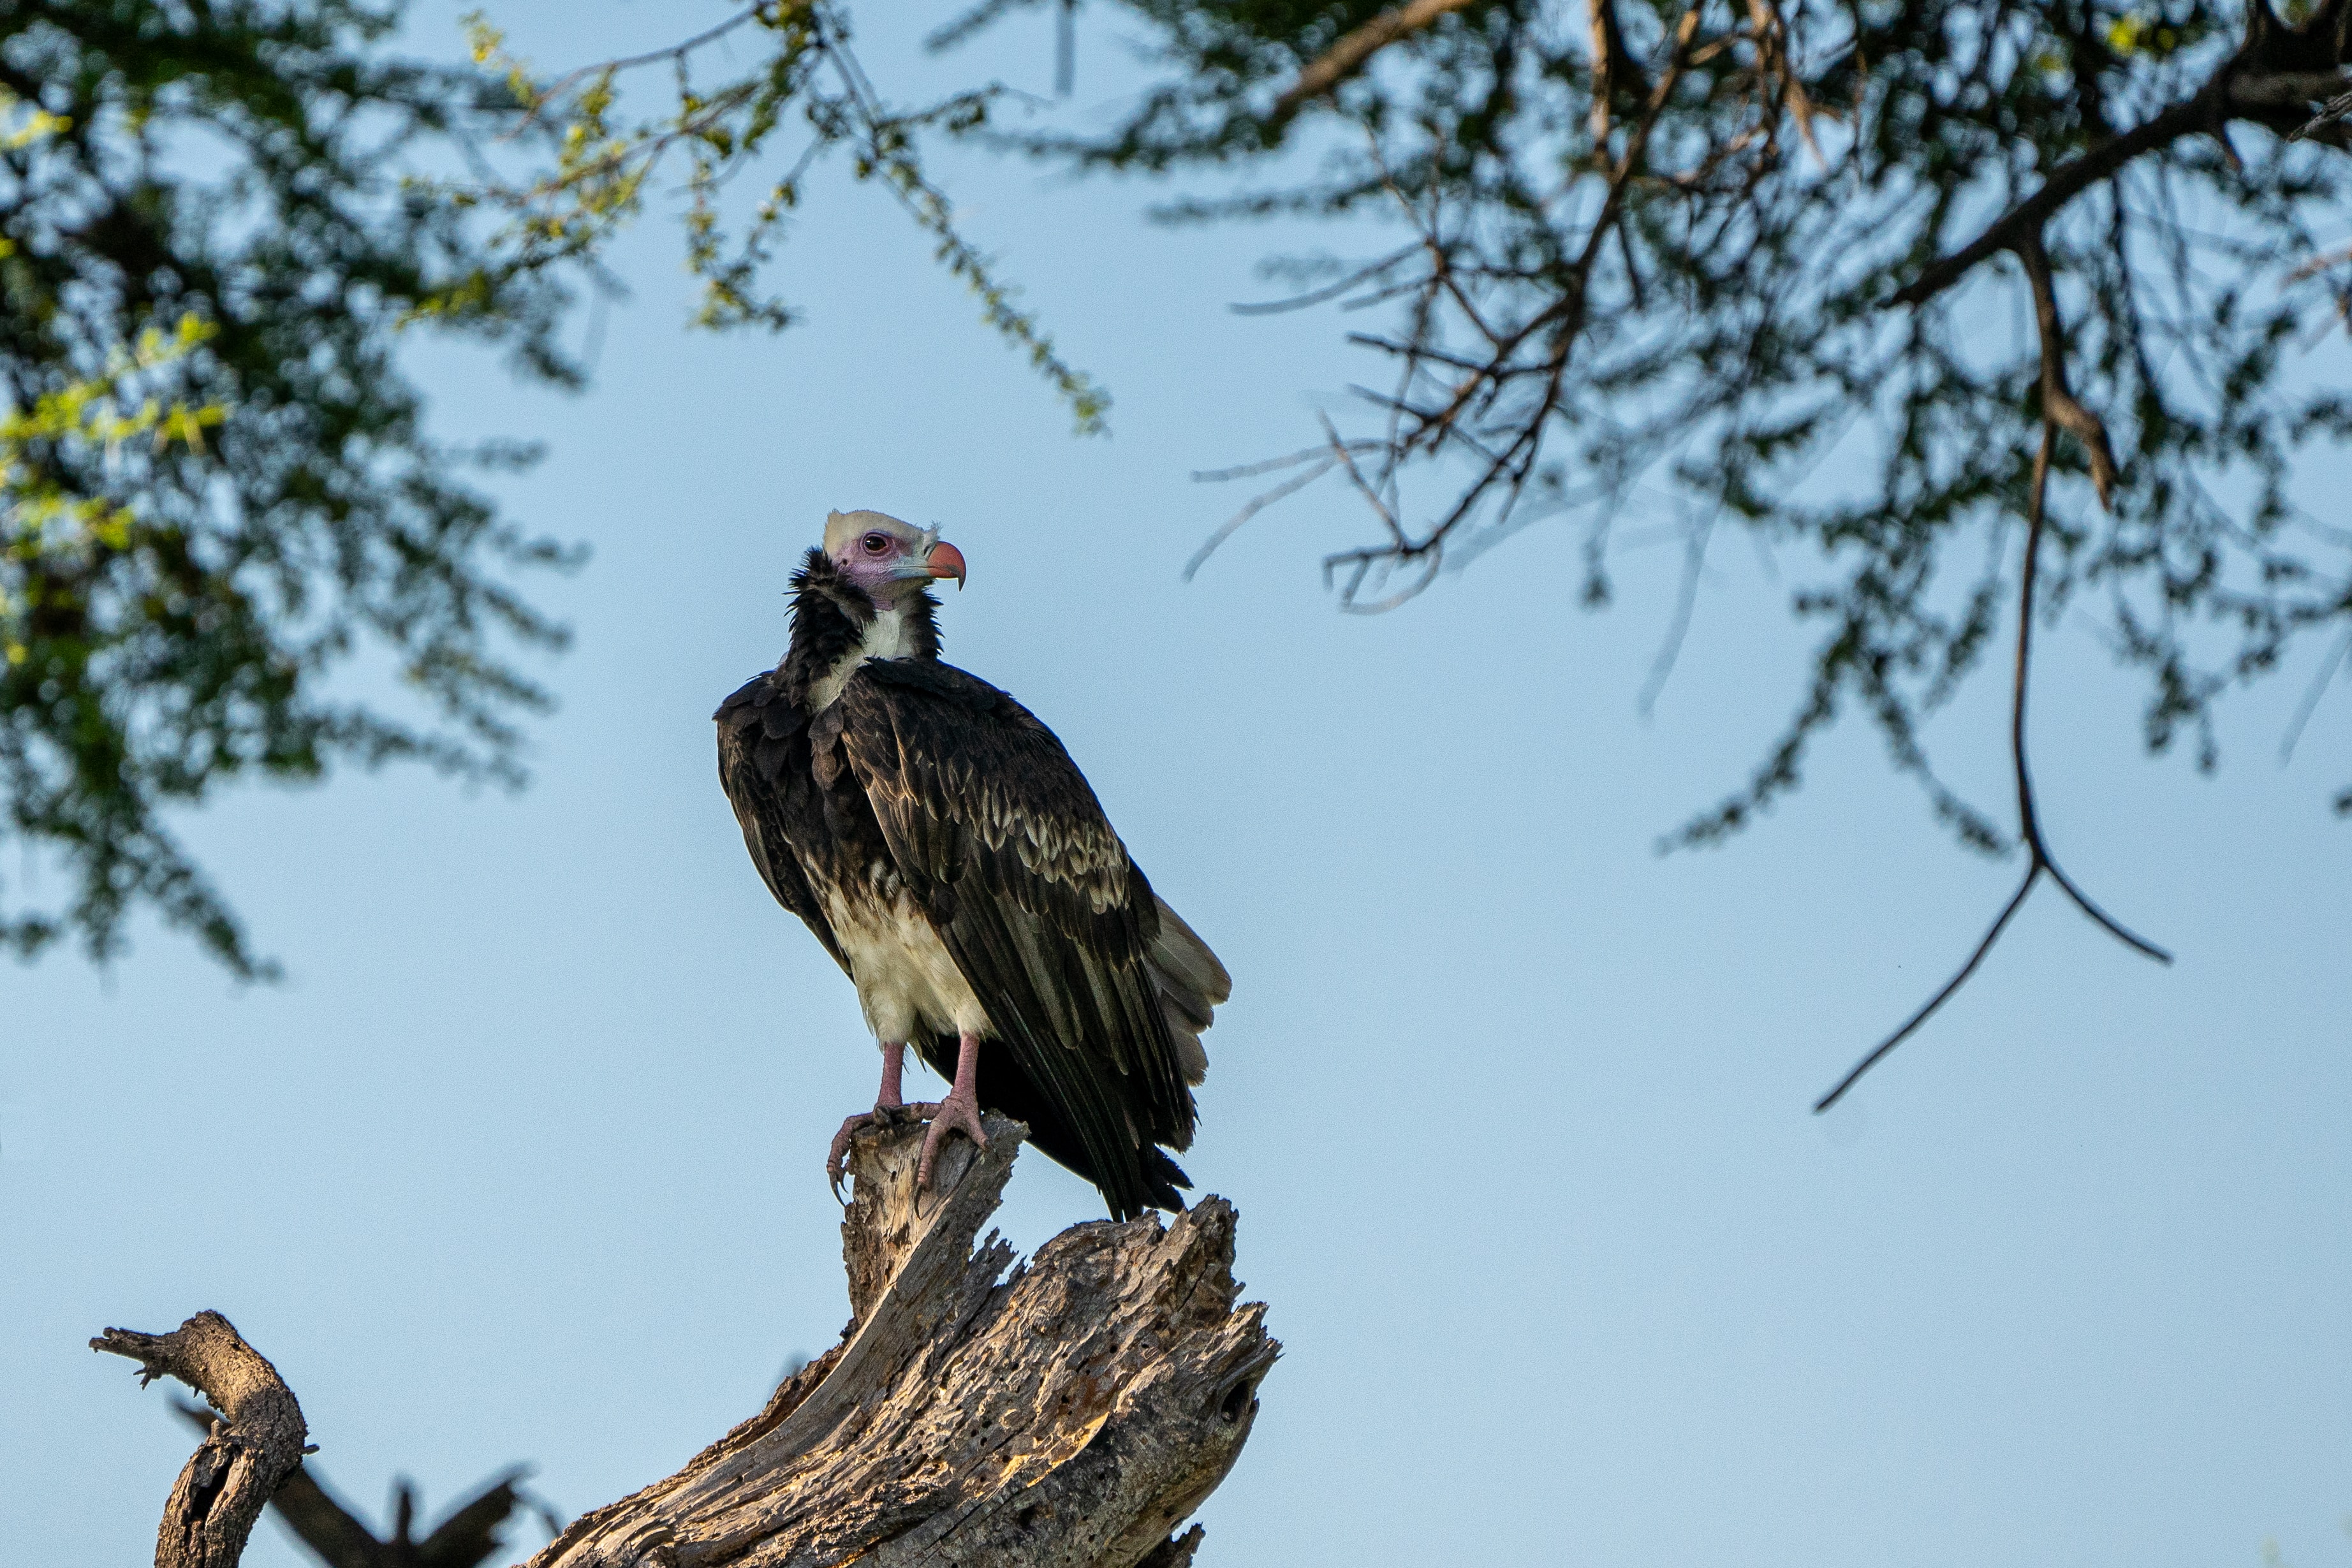 An endangered white-headed vulture sitting on a large broken branch, against a light blue sky.